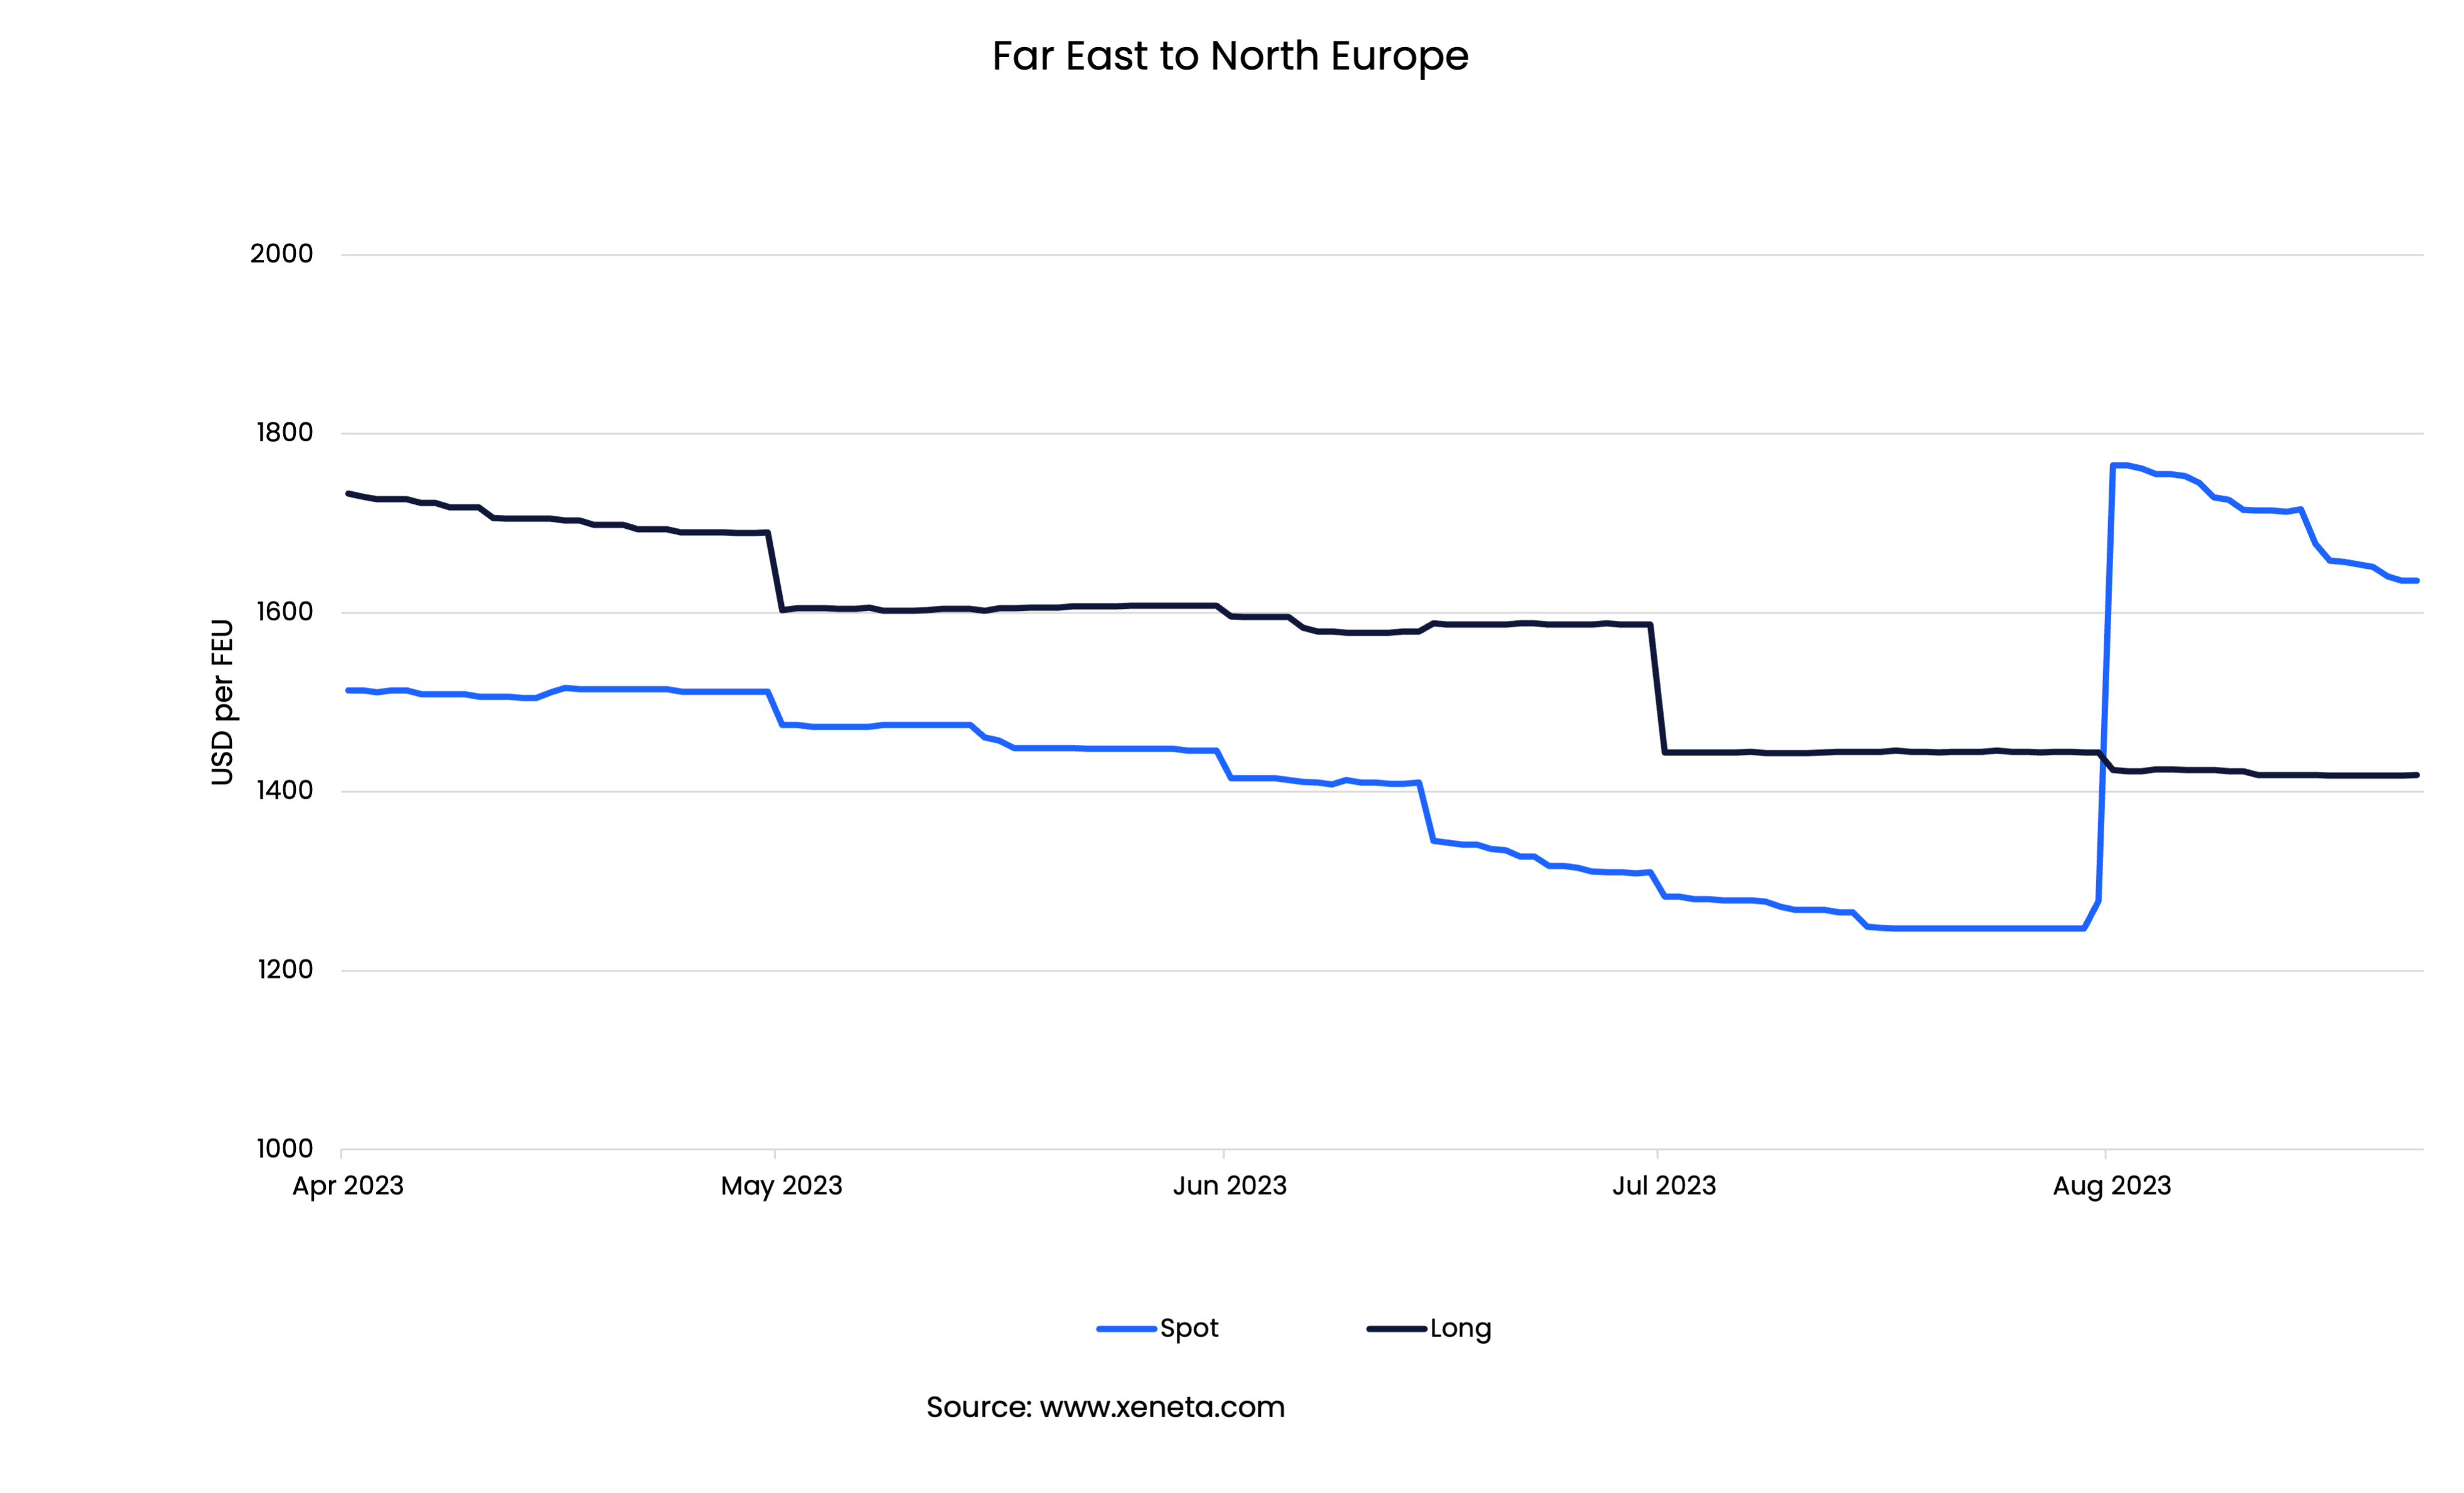 FarEast to North EU - Ocean Freight Spot and Long Term Rates